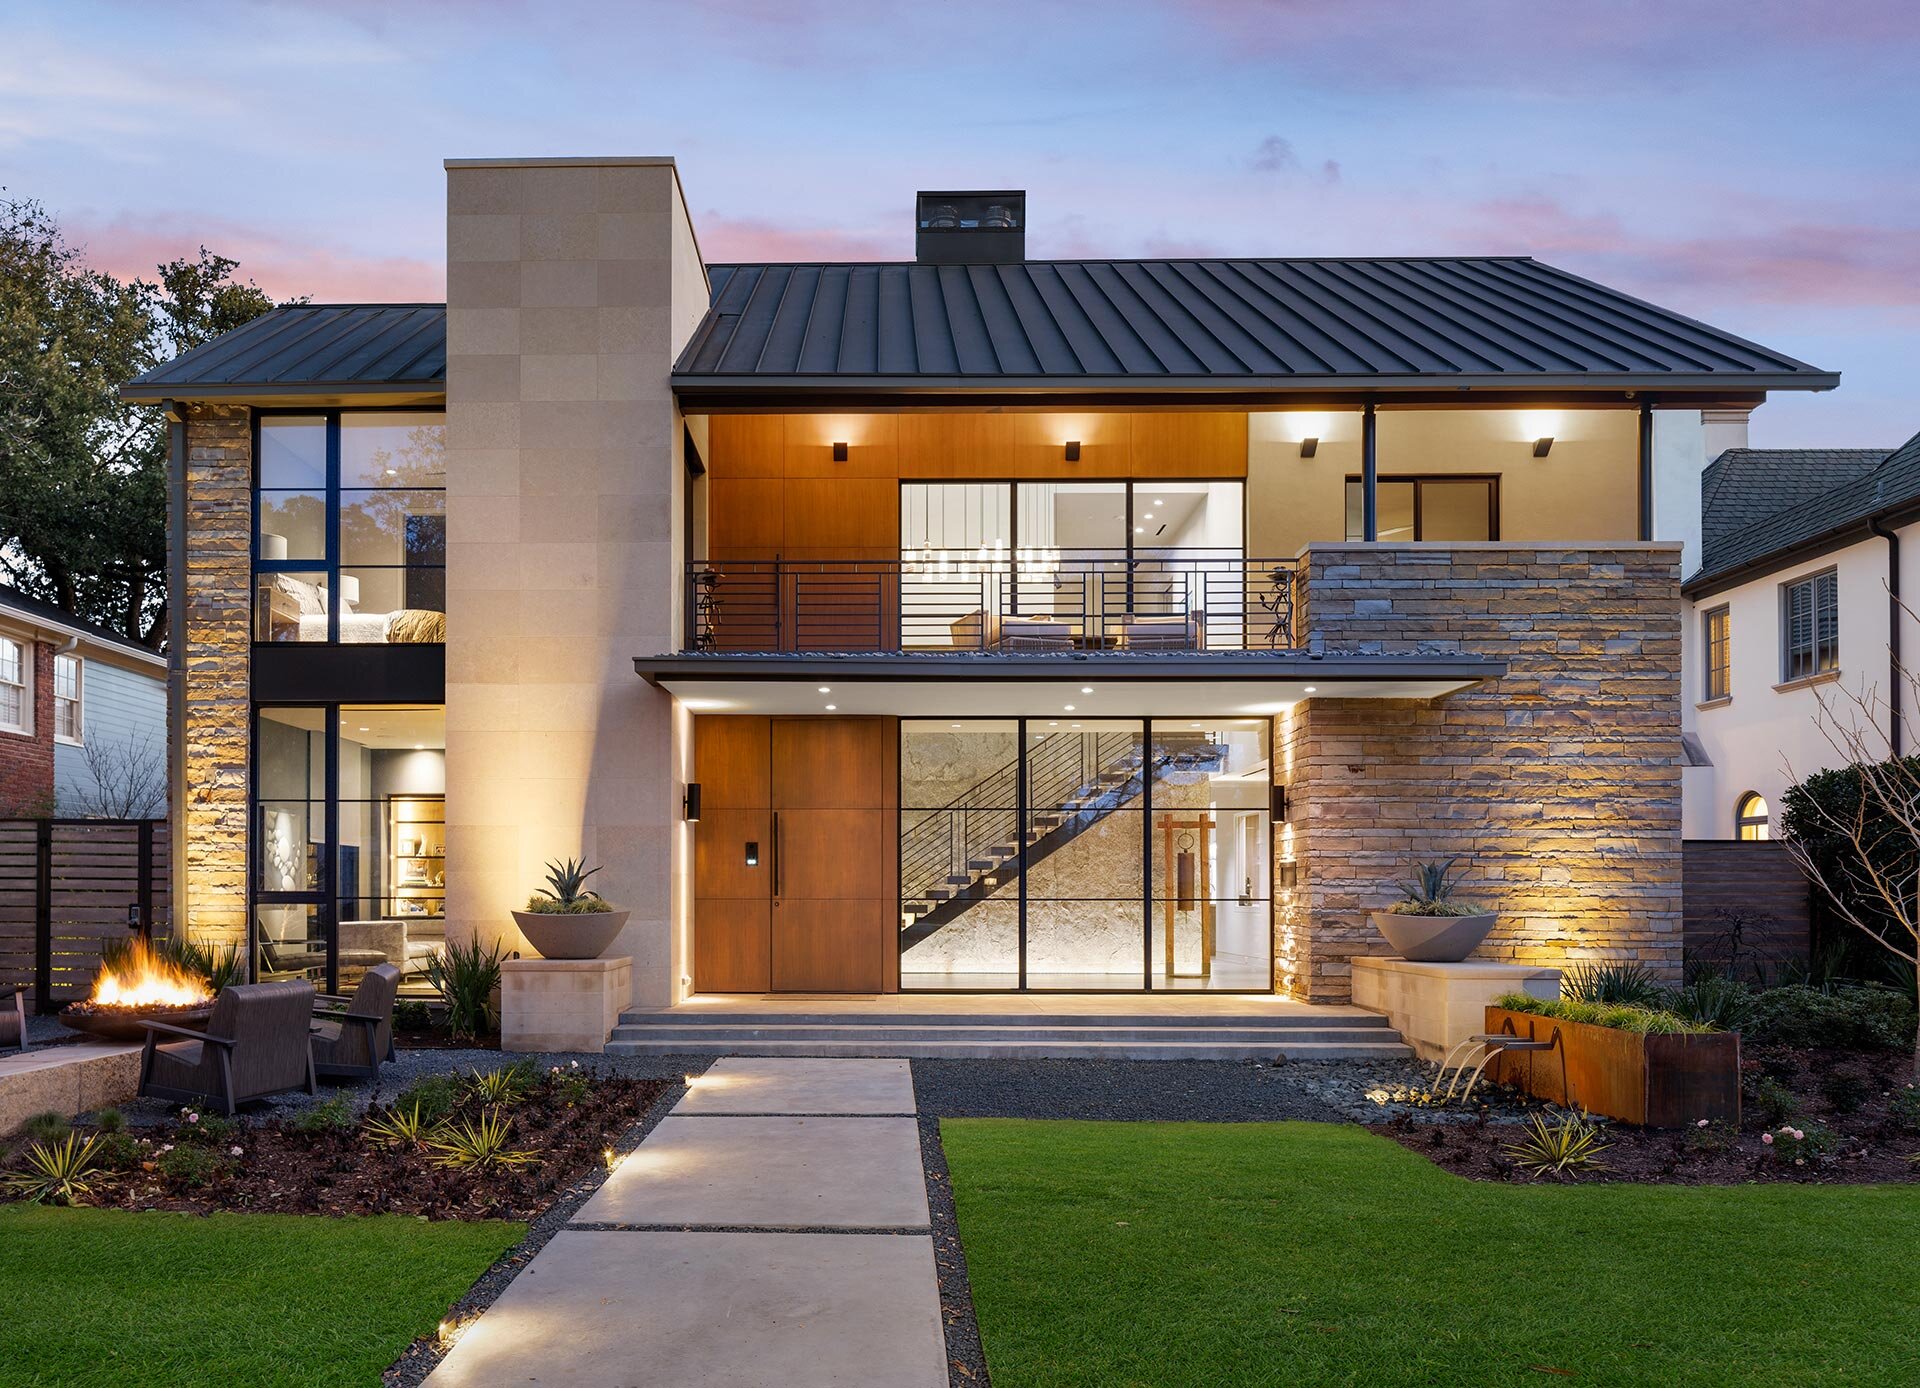  This modern comfortable contemporary home features contemporary execution of Texas vernacular materials of chopped stone, metal roof, wood and stucco 